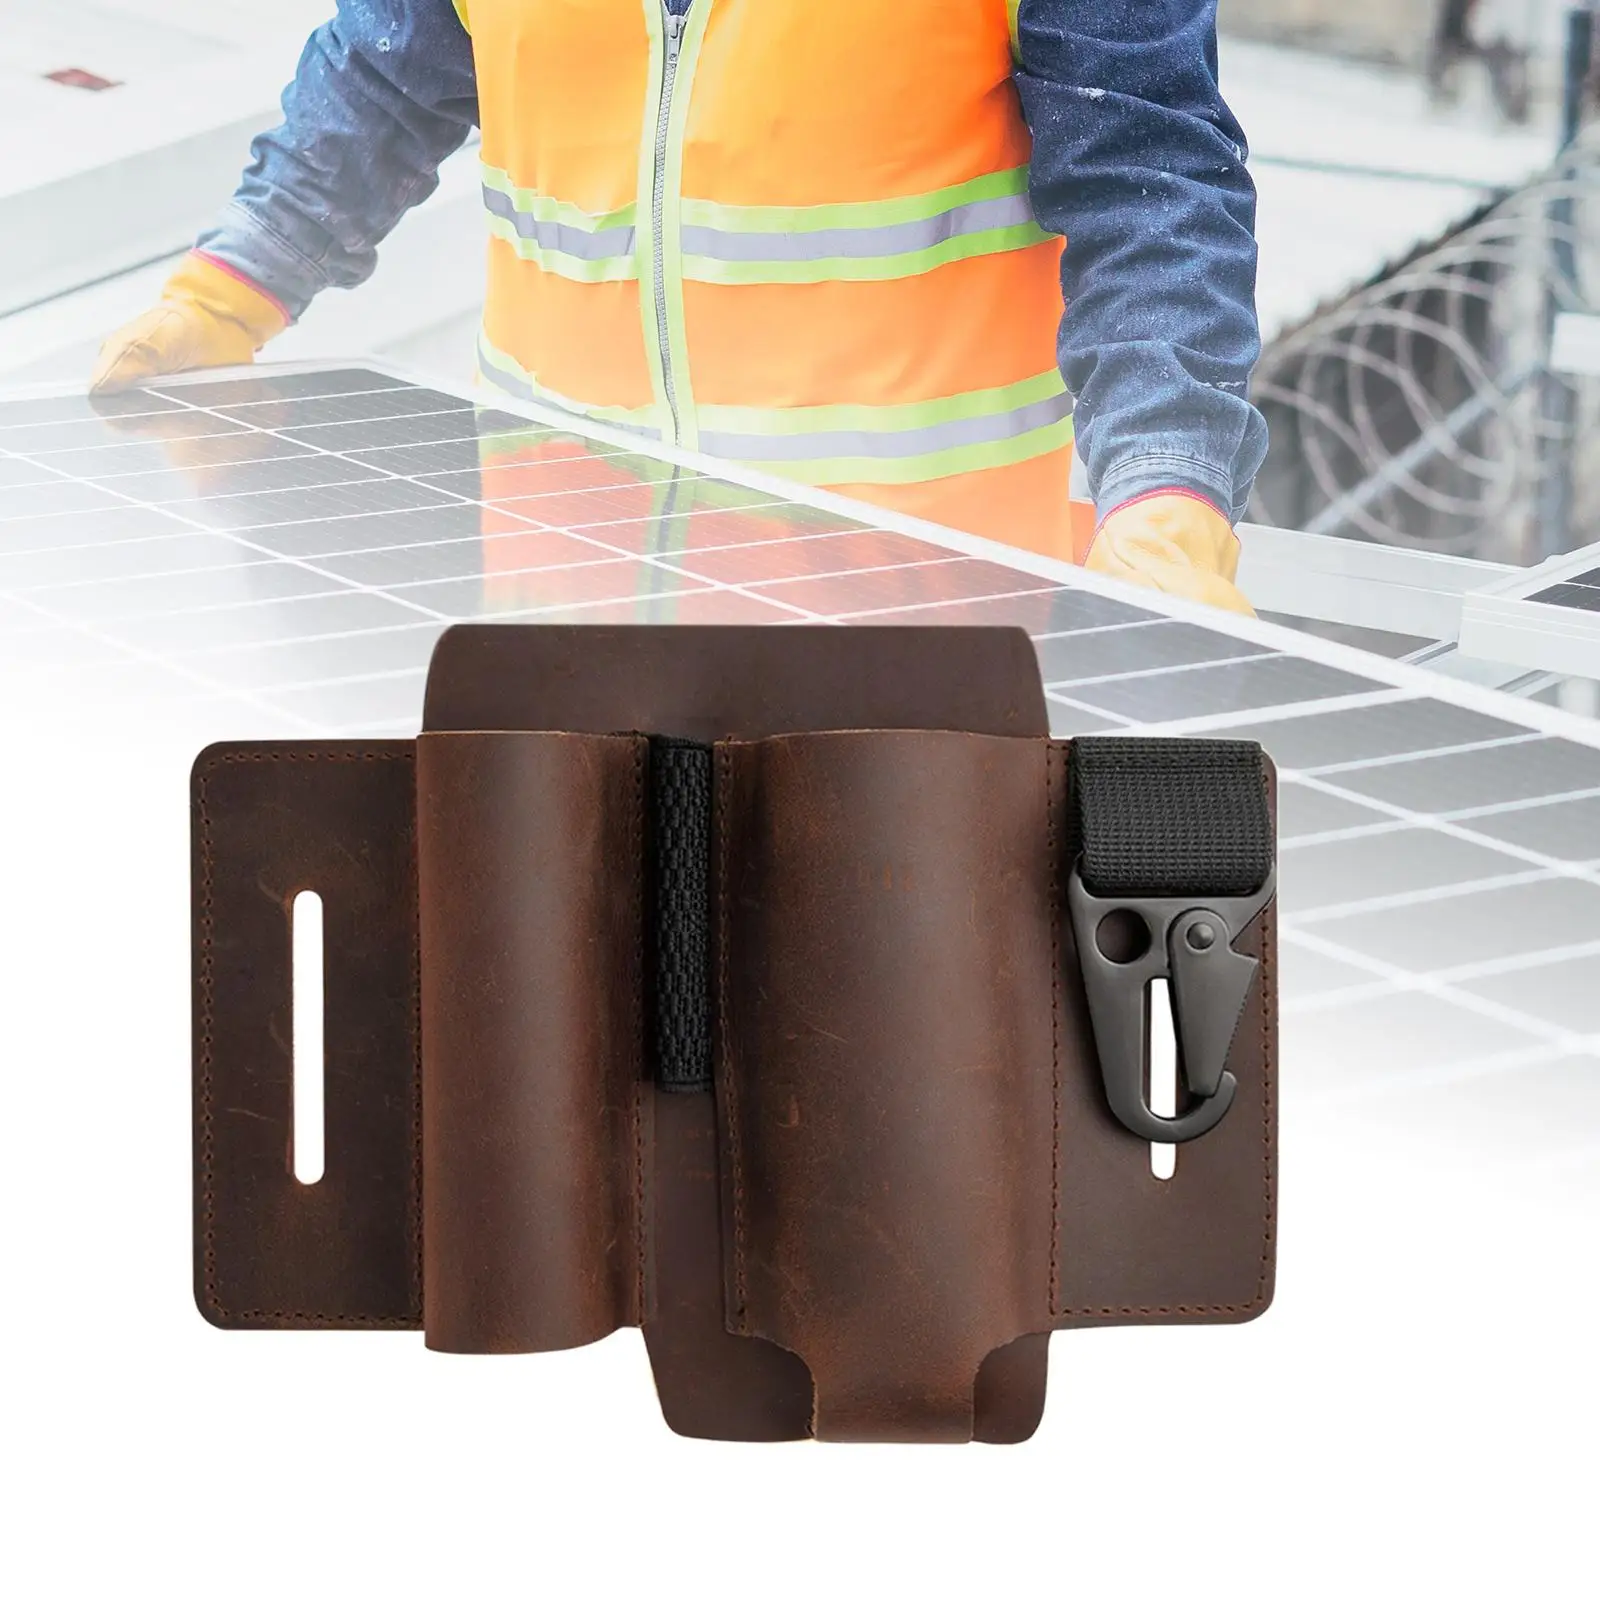 Multifunction Tool Belt Construction Tool Belt Work Pouch Tool Waist Bag for Electrician